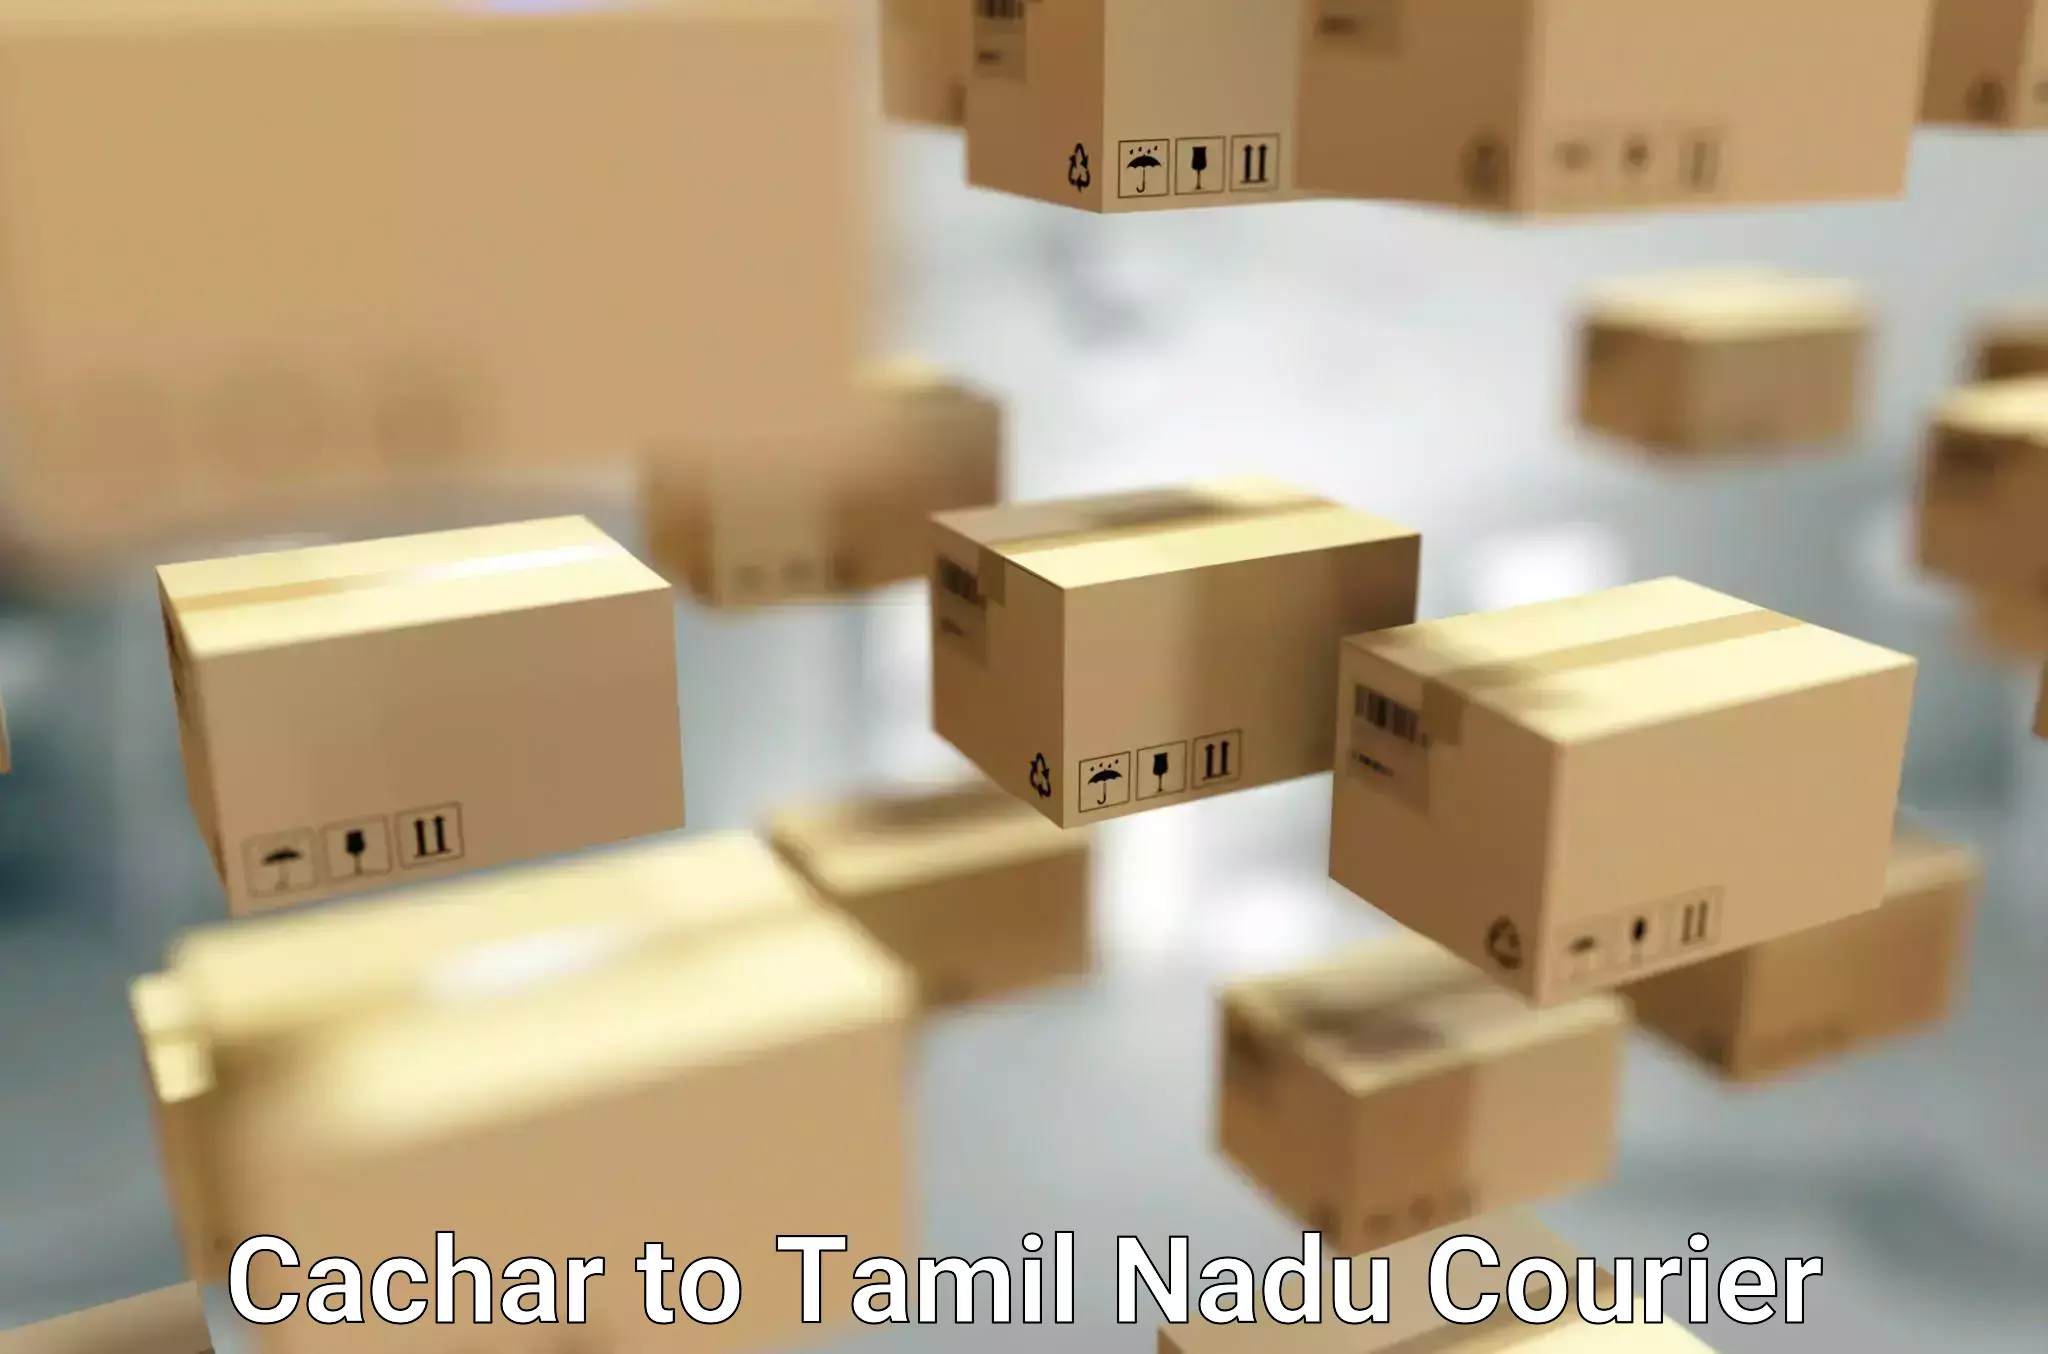 Home relocation experts Cachar to Tamil Nadu